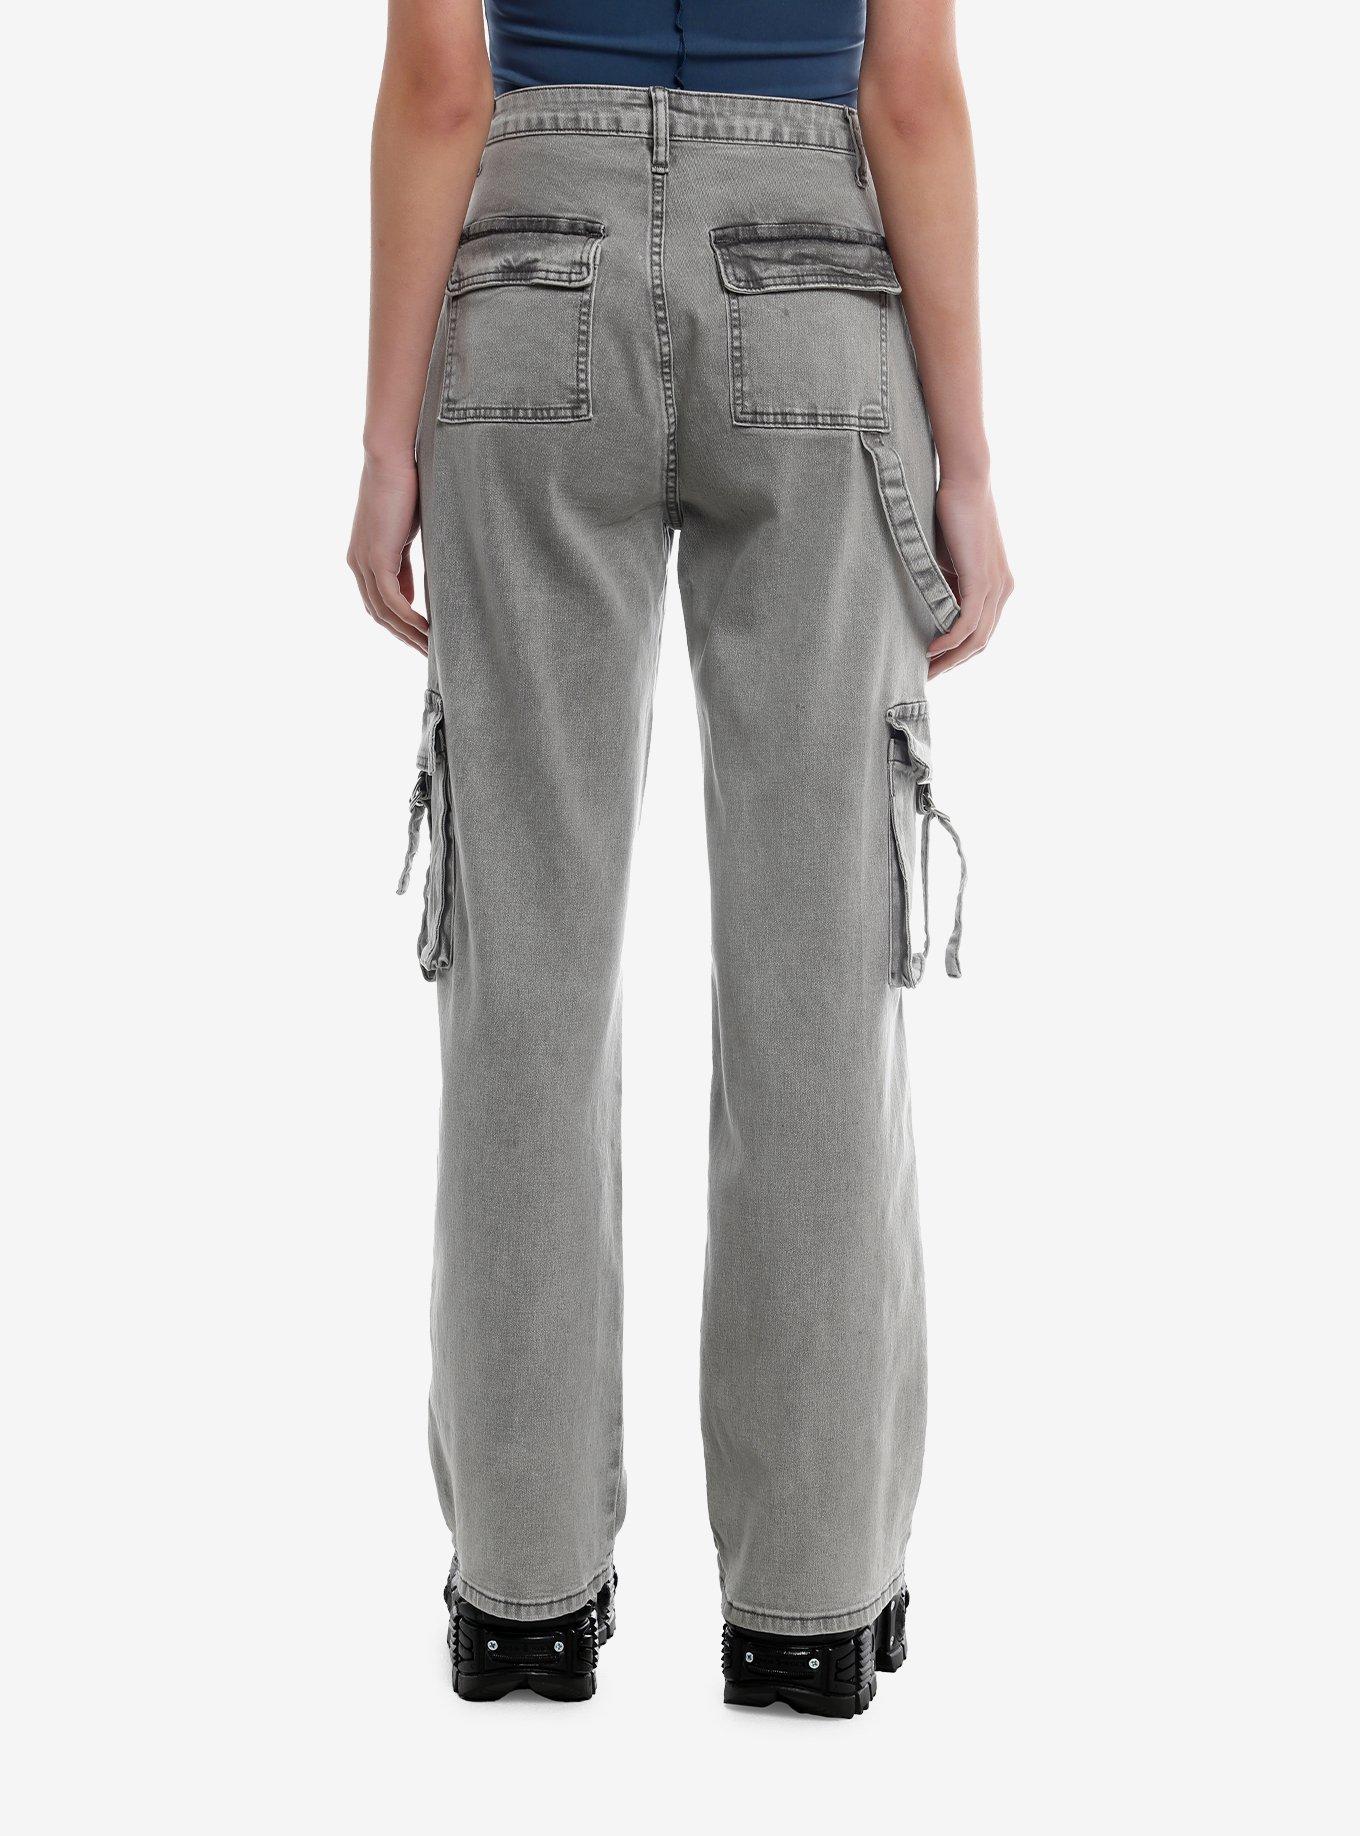 Grey Washed Cargo Wide Leg Girls Jeans